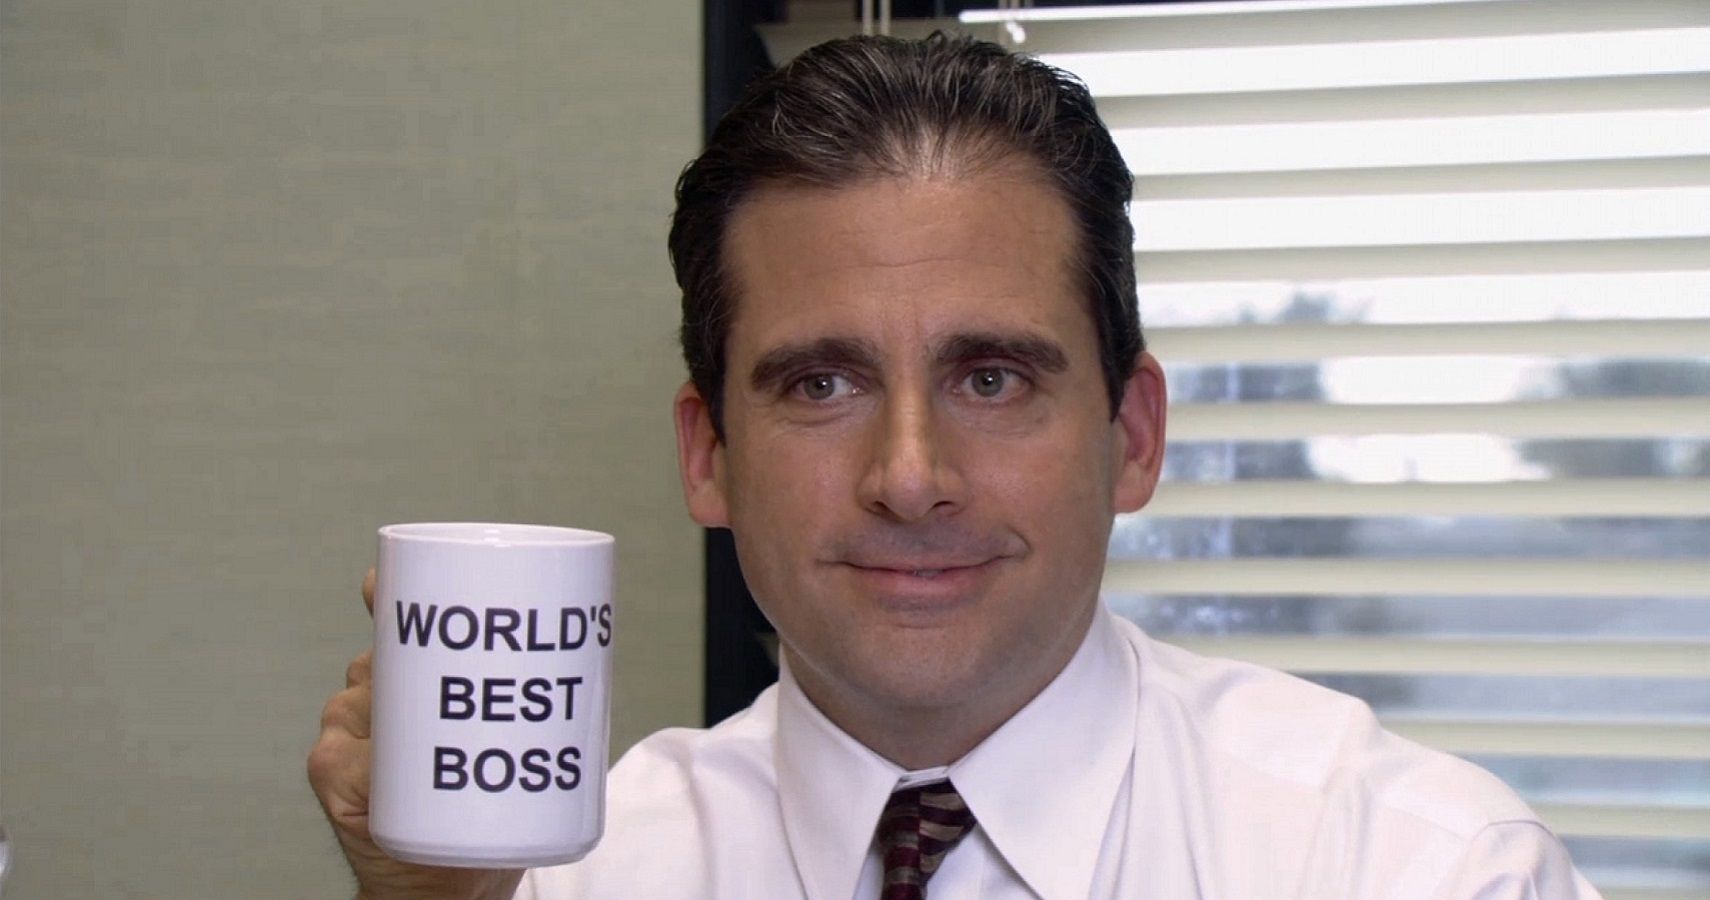 The Office: 10 Most Relatable Quotes About The Workplace